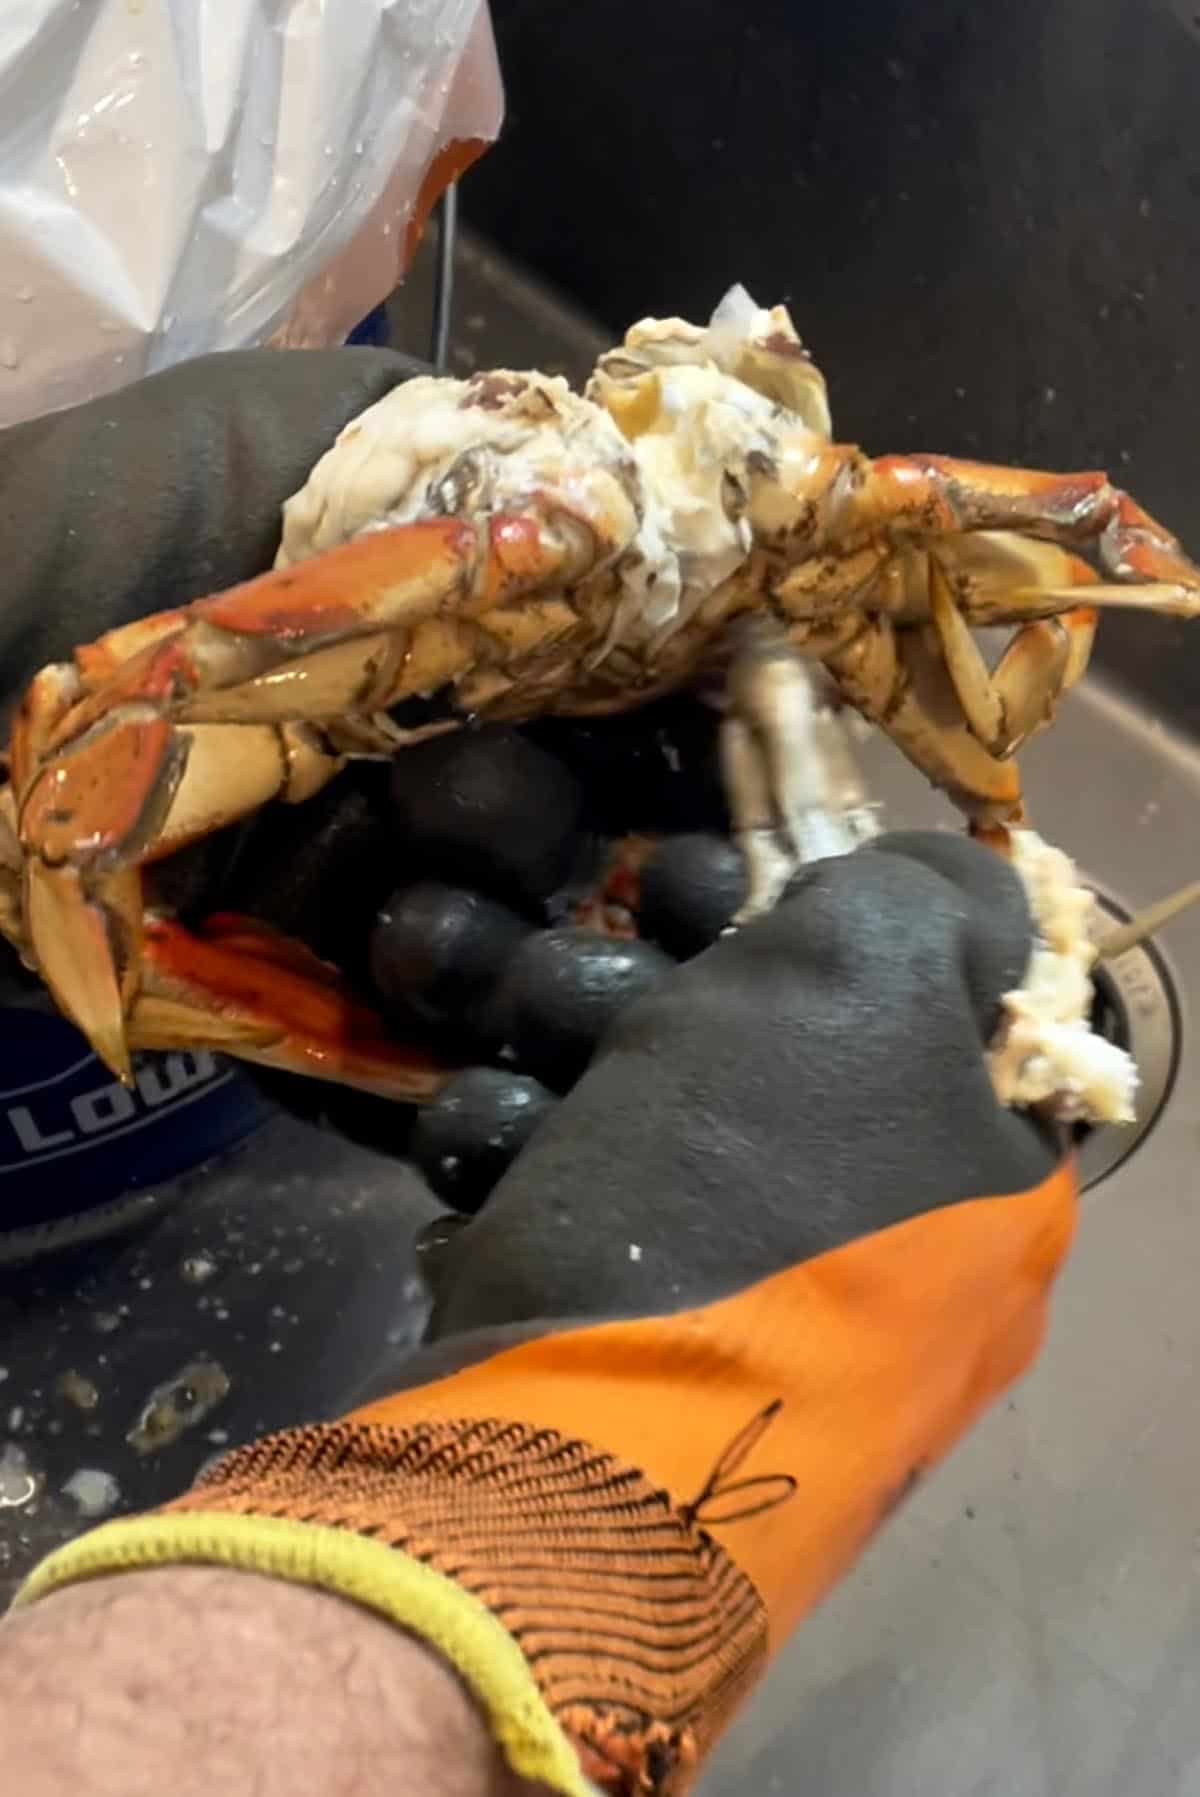 The apron being removed from a Dungeness crab.